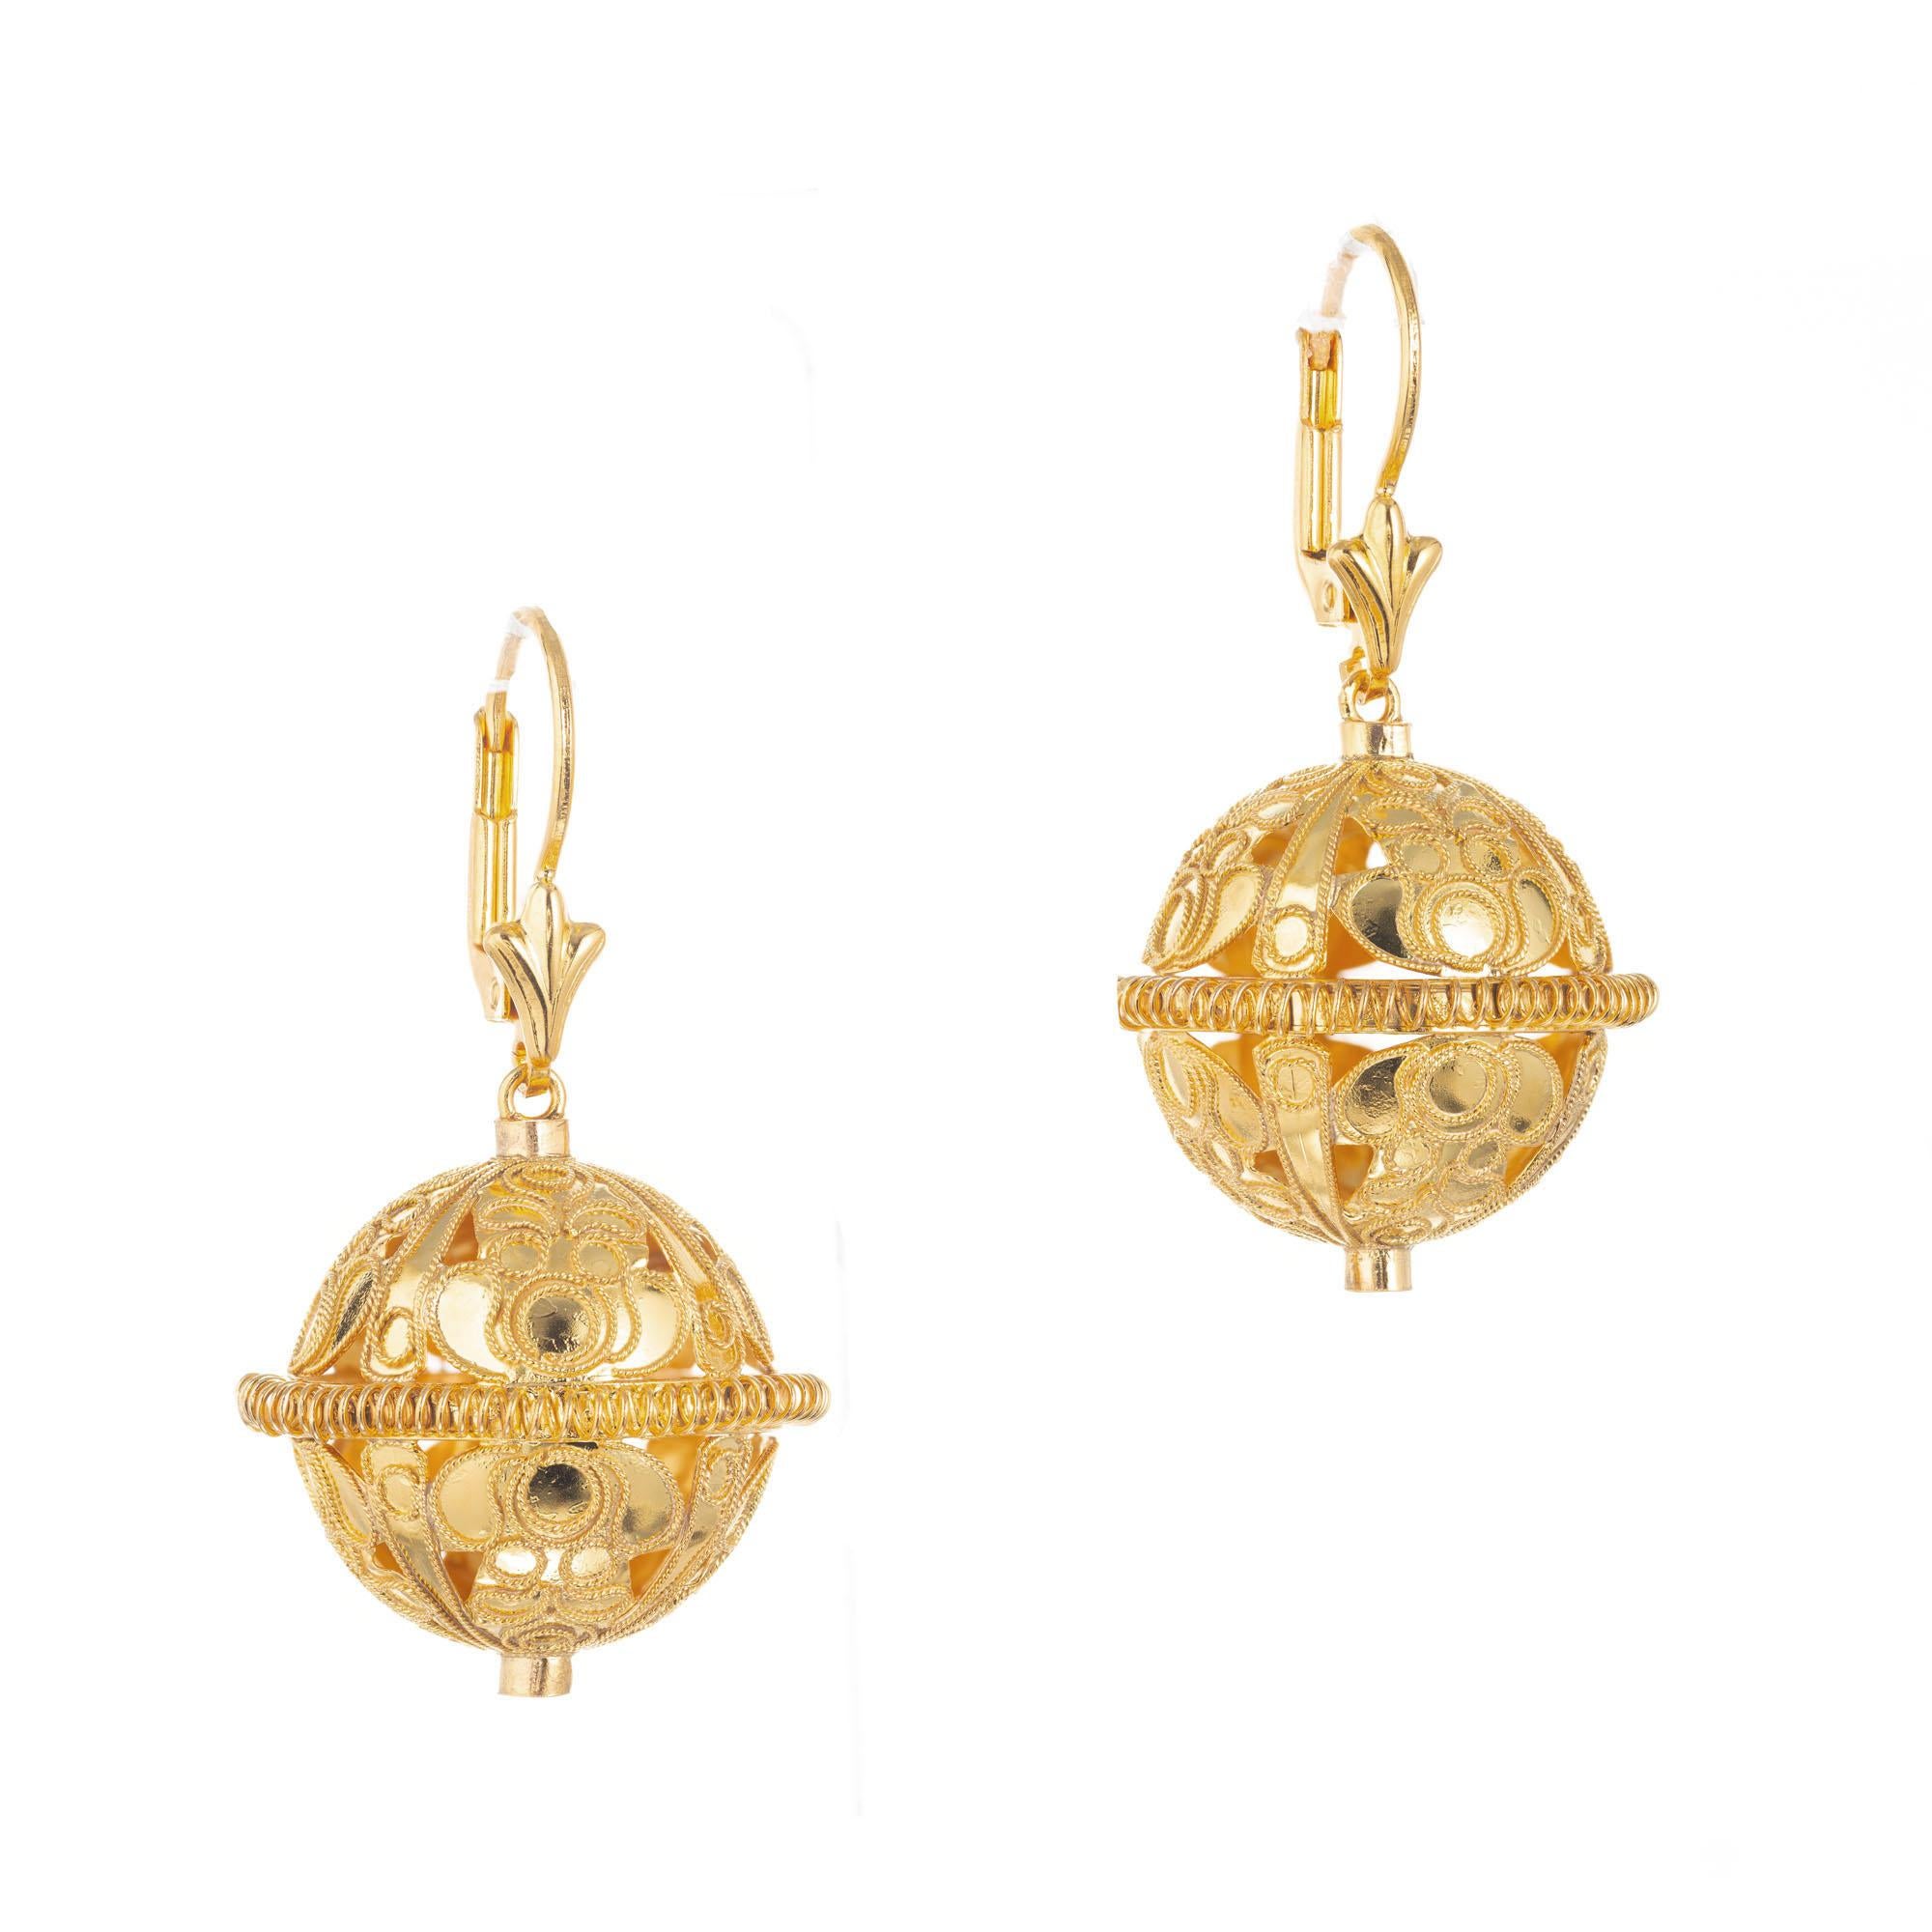 14k yellow gold open work ball dangle earrings. 

Length: 1.11 inches or 28.37mm
Width: .84 inches or 21.48mm
Weight: 8.5 grams
